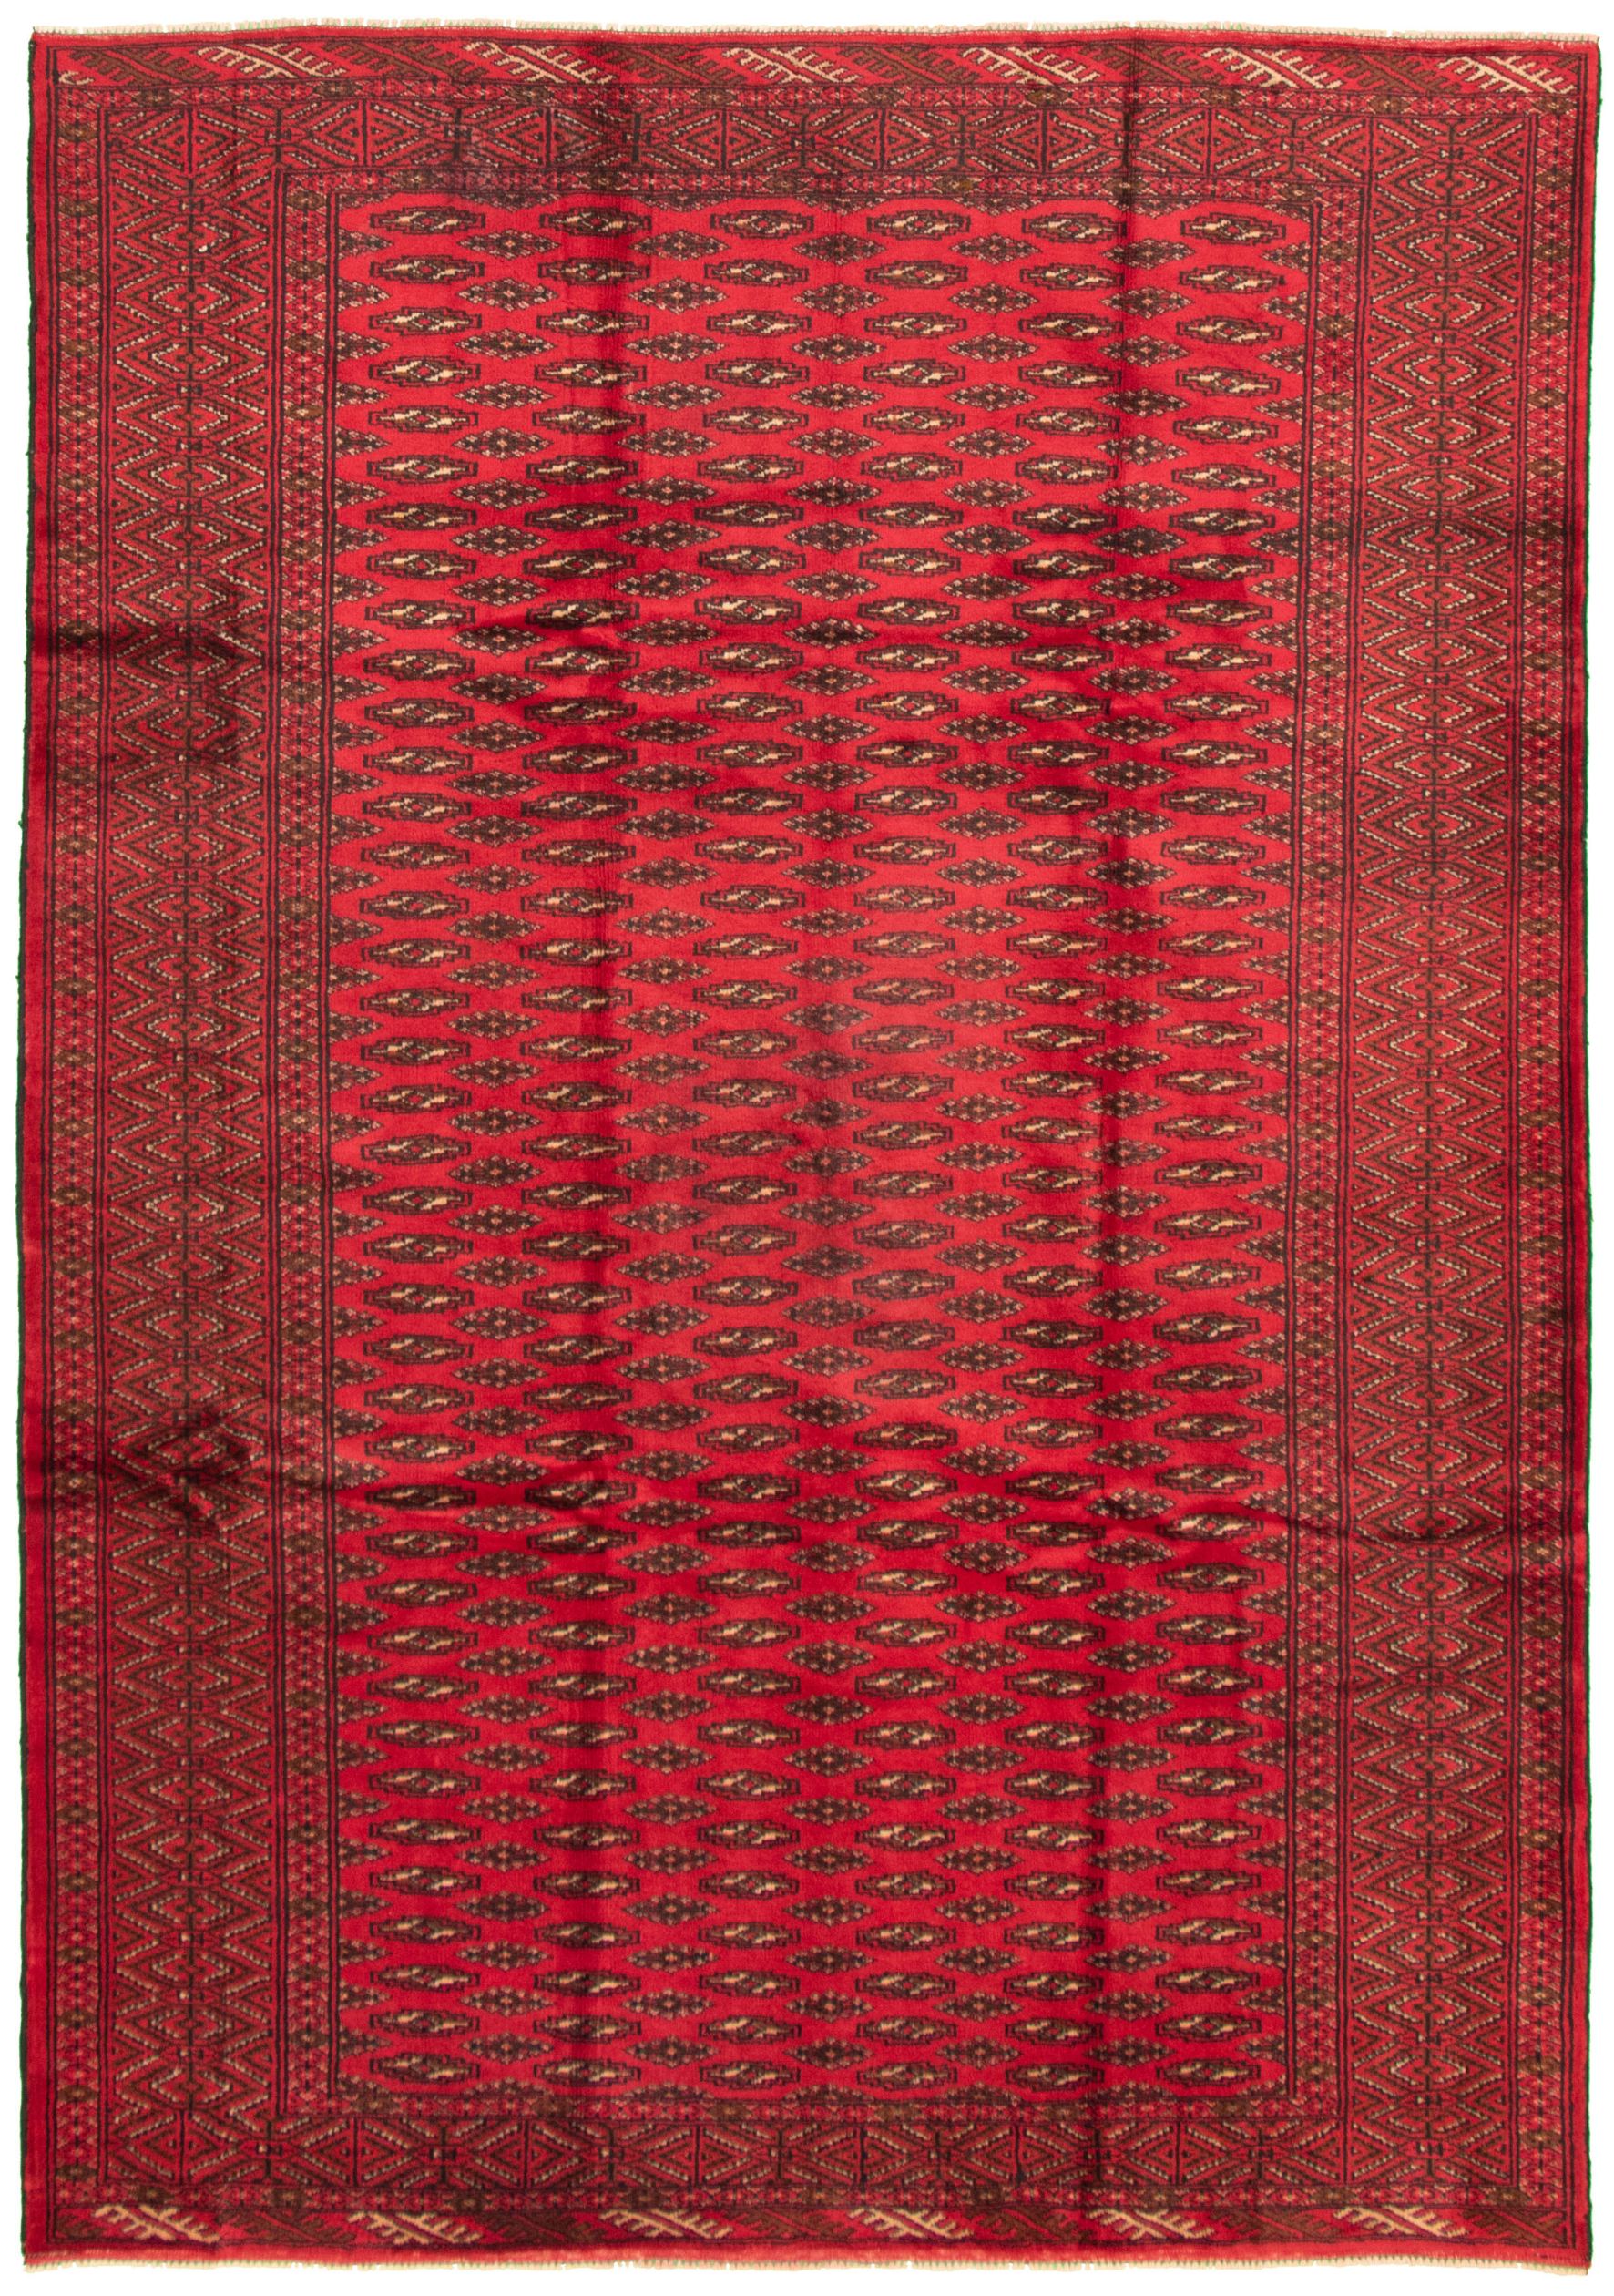 Hand-knotted Khal Mohammadi Red Wool Rug 6'6" x 9'4"  Size: 6'6" x 9'4"  